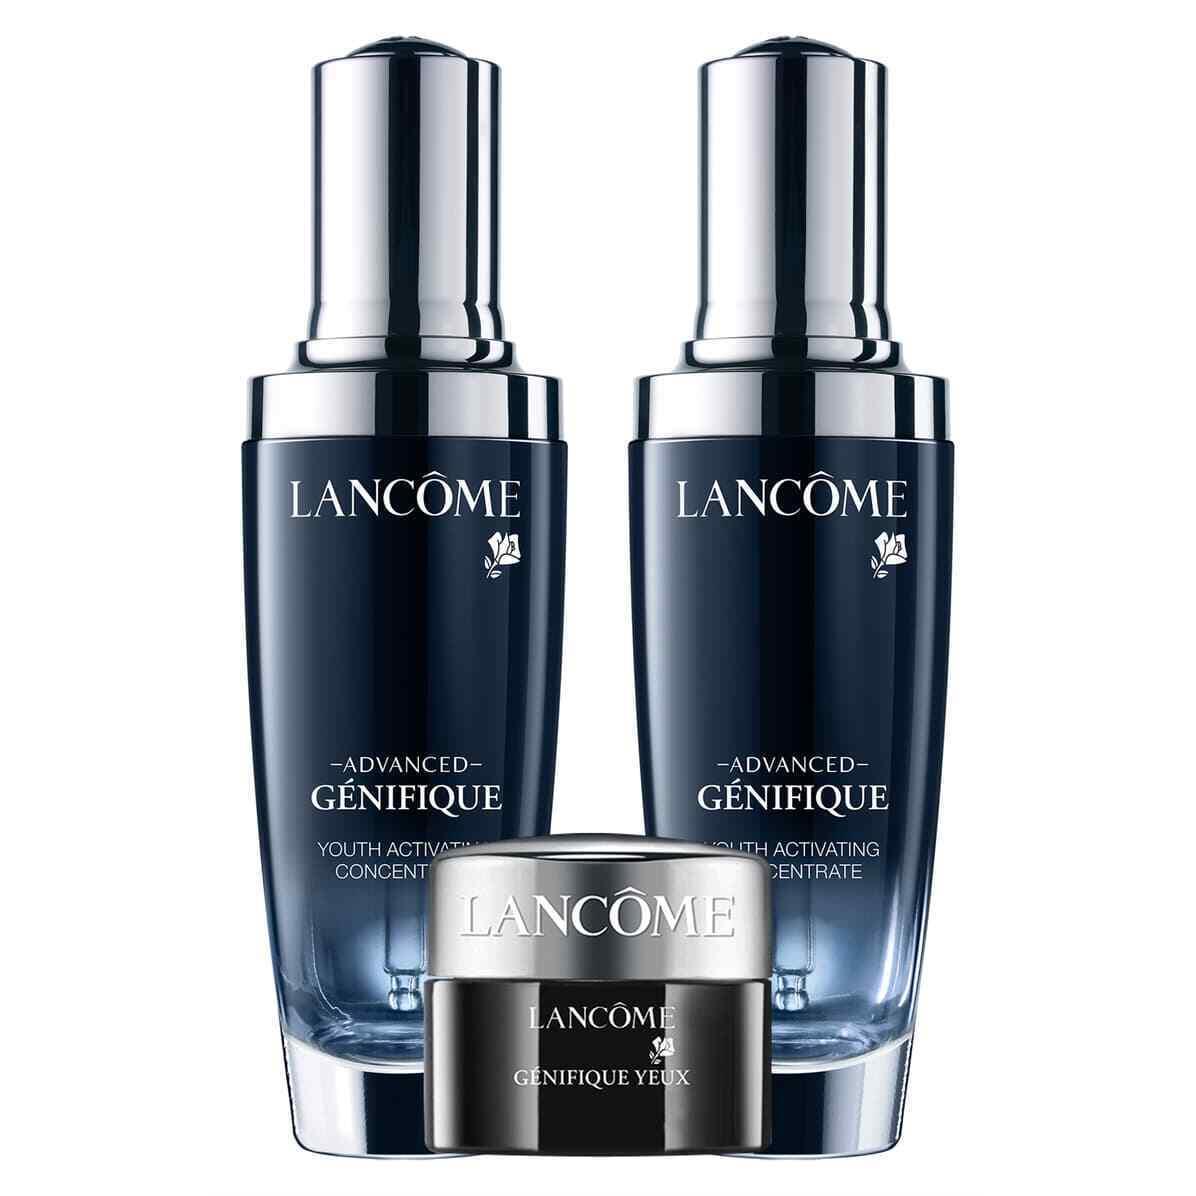 Lancome Advanced G Nifique Youth Activating Concentrate Serum Eye Trio